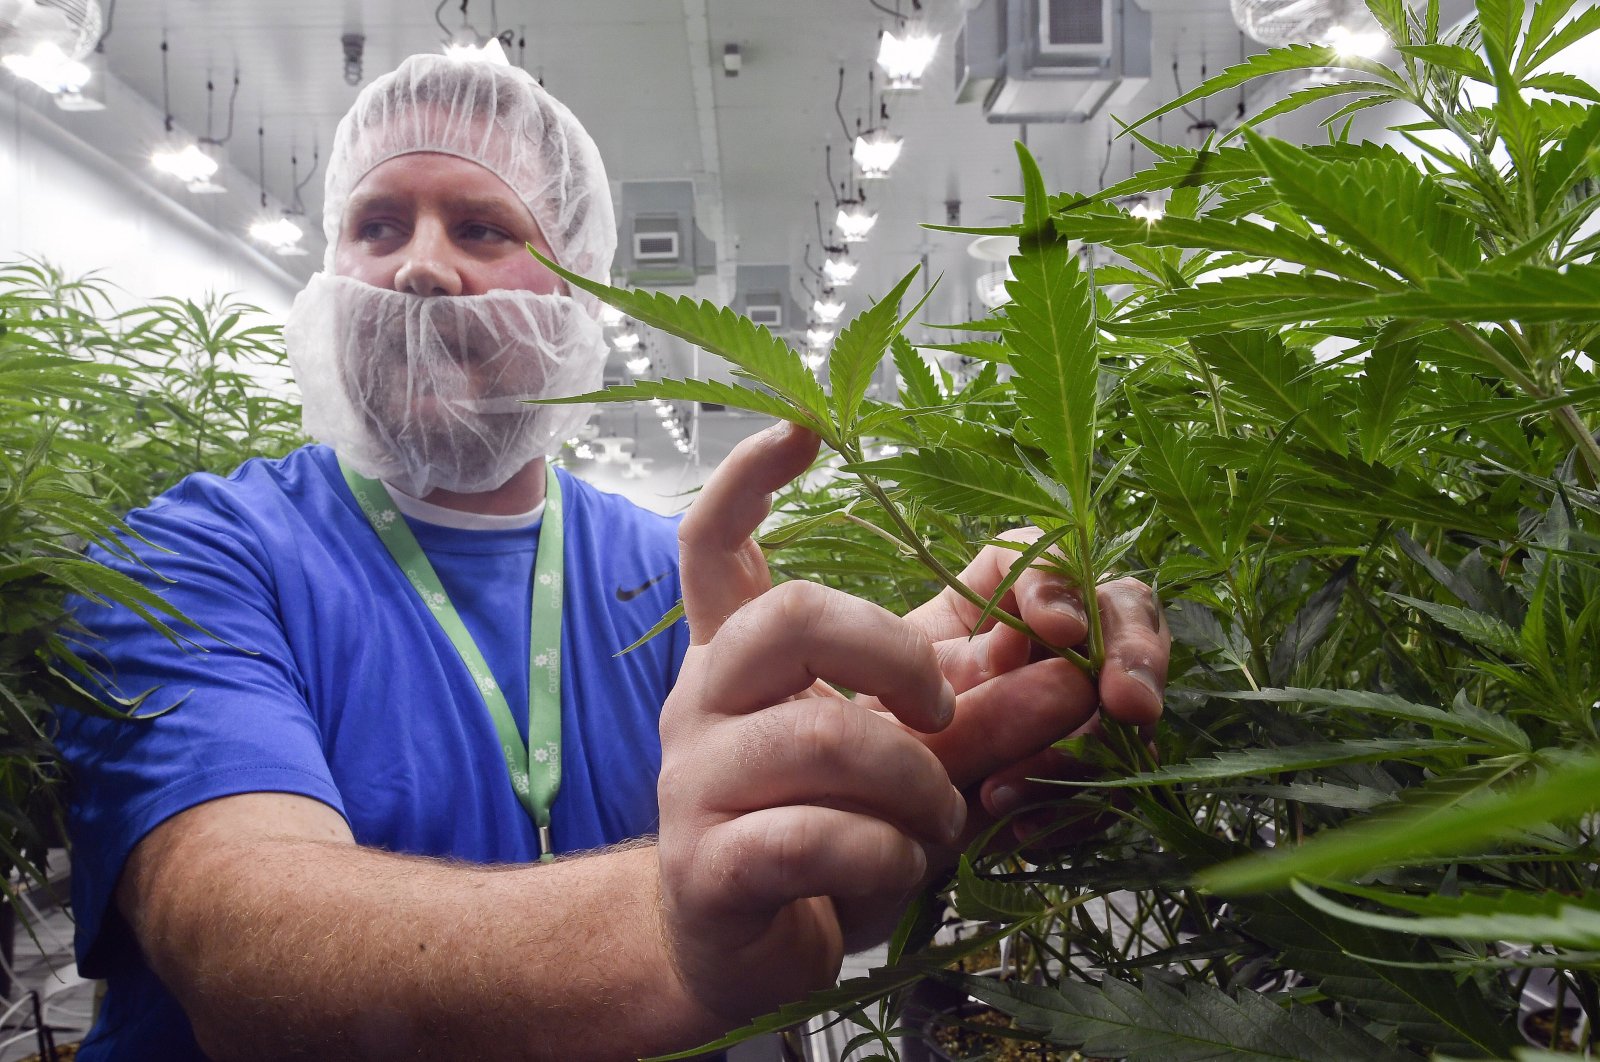 Nate McDonald, General Manager of Curaleaf NY operations, talks about medical marijuana plants during a media tour of the Curaleaf medical cannabis cultivation and processing facility, in Ravena, N.Y., U.S., Aug. 22, 2019. (AP Photo)